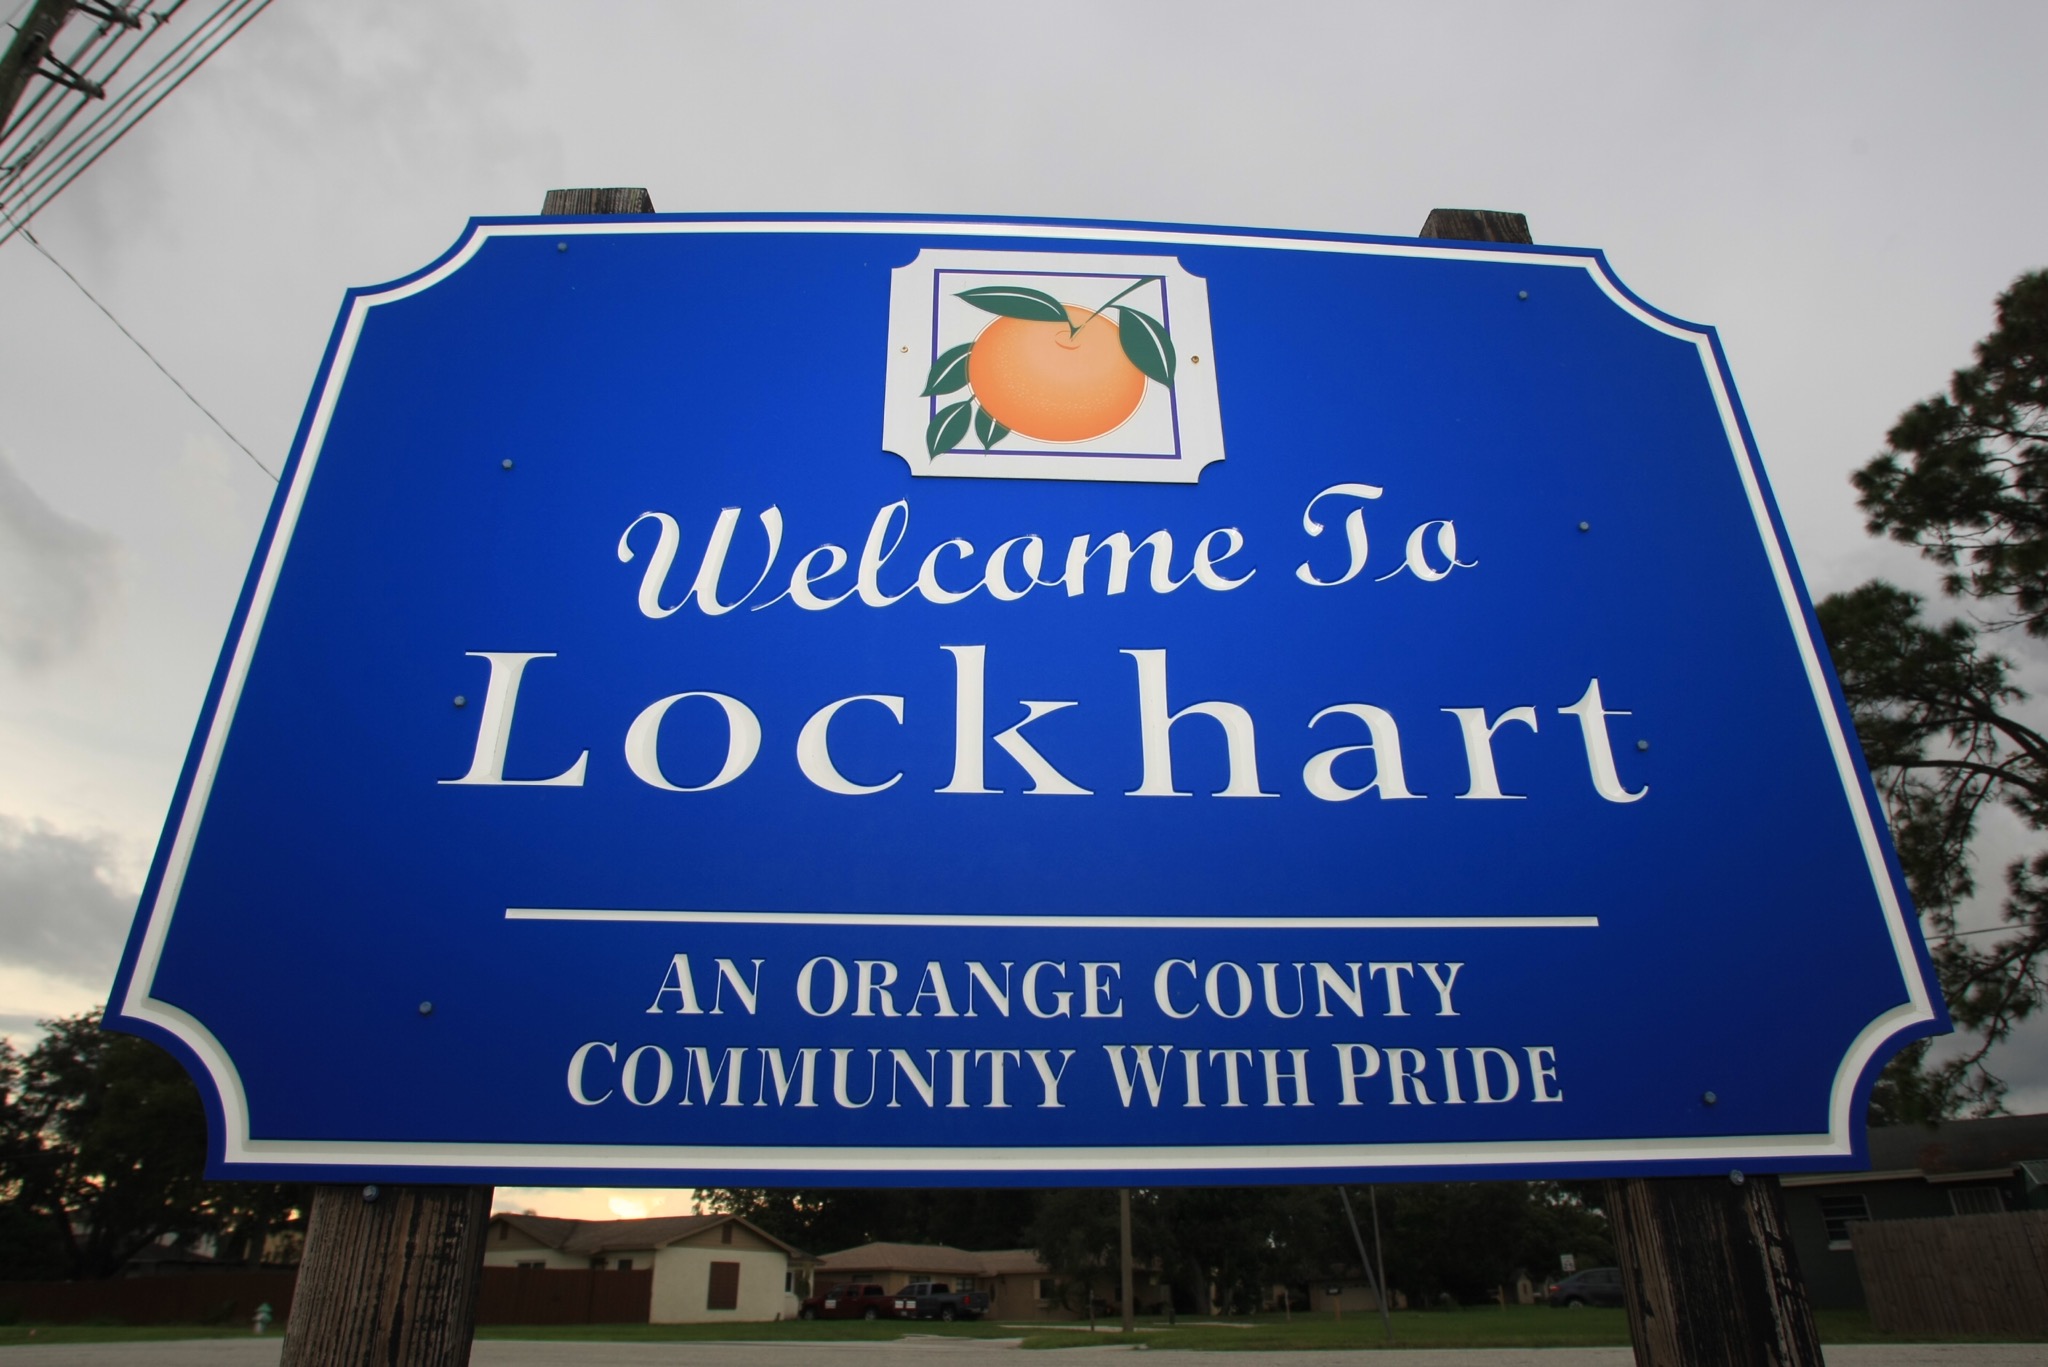 Sign reads: "Welcome to Lockhart, an Orange County Community with Pride"